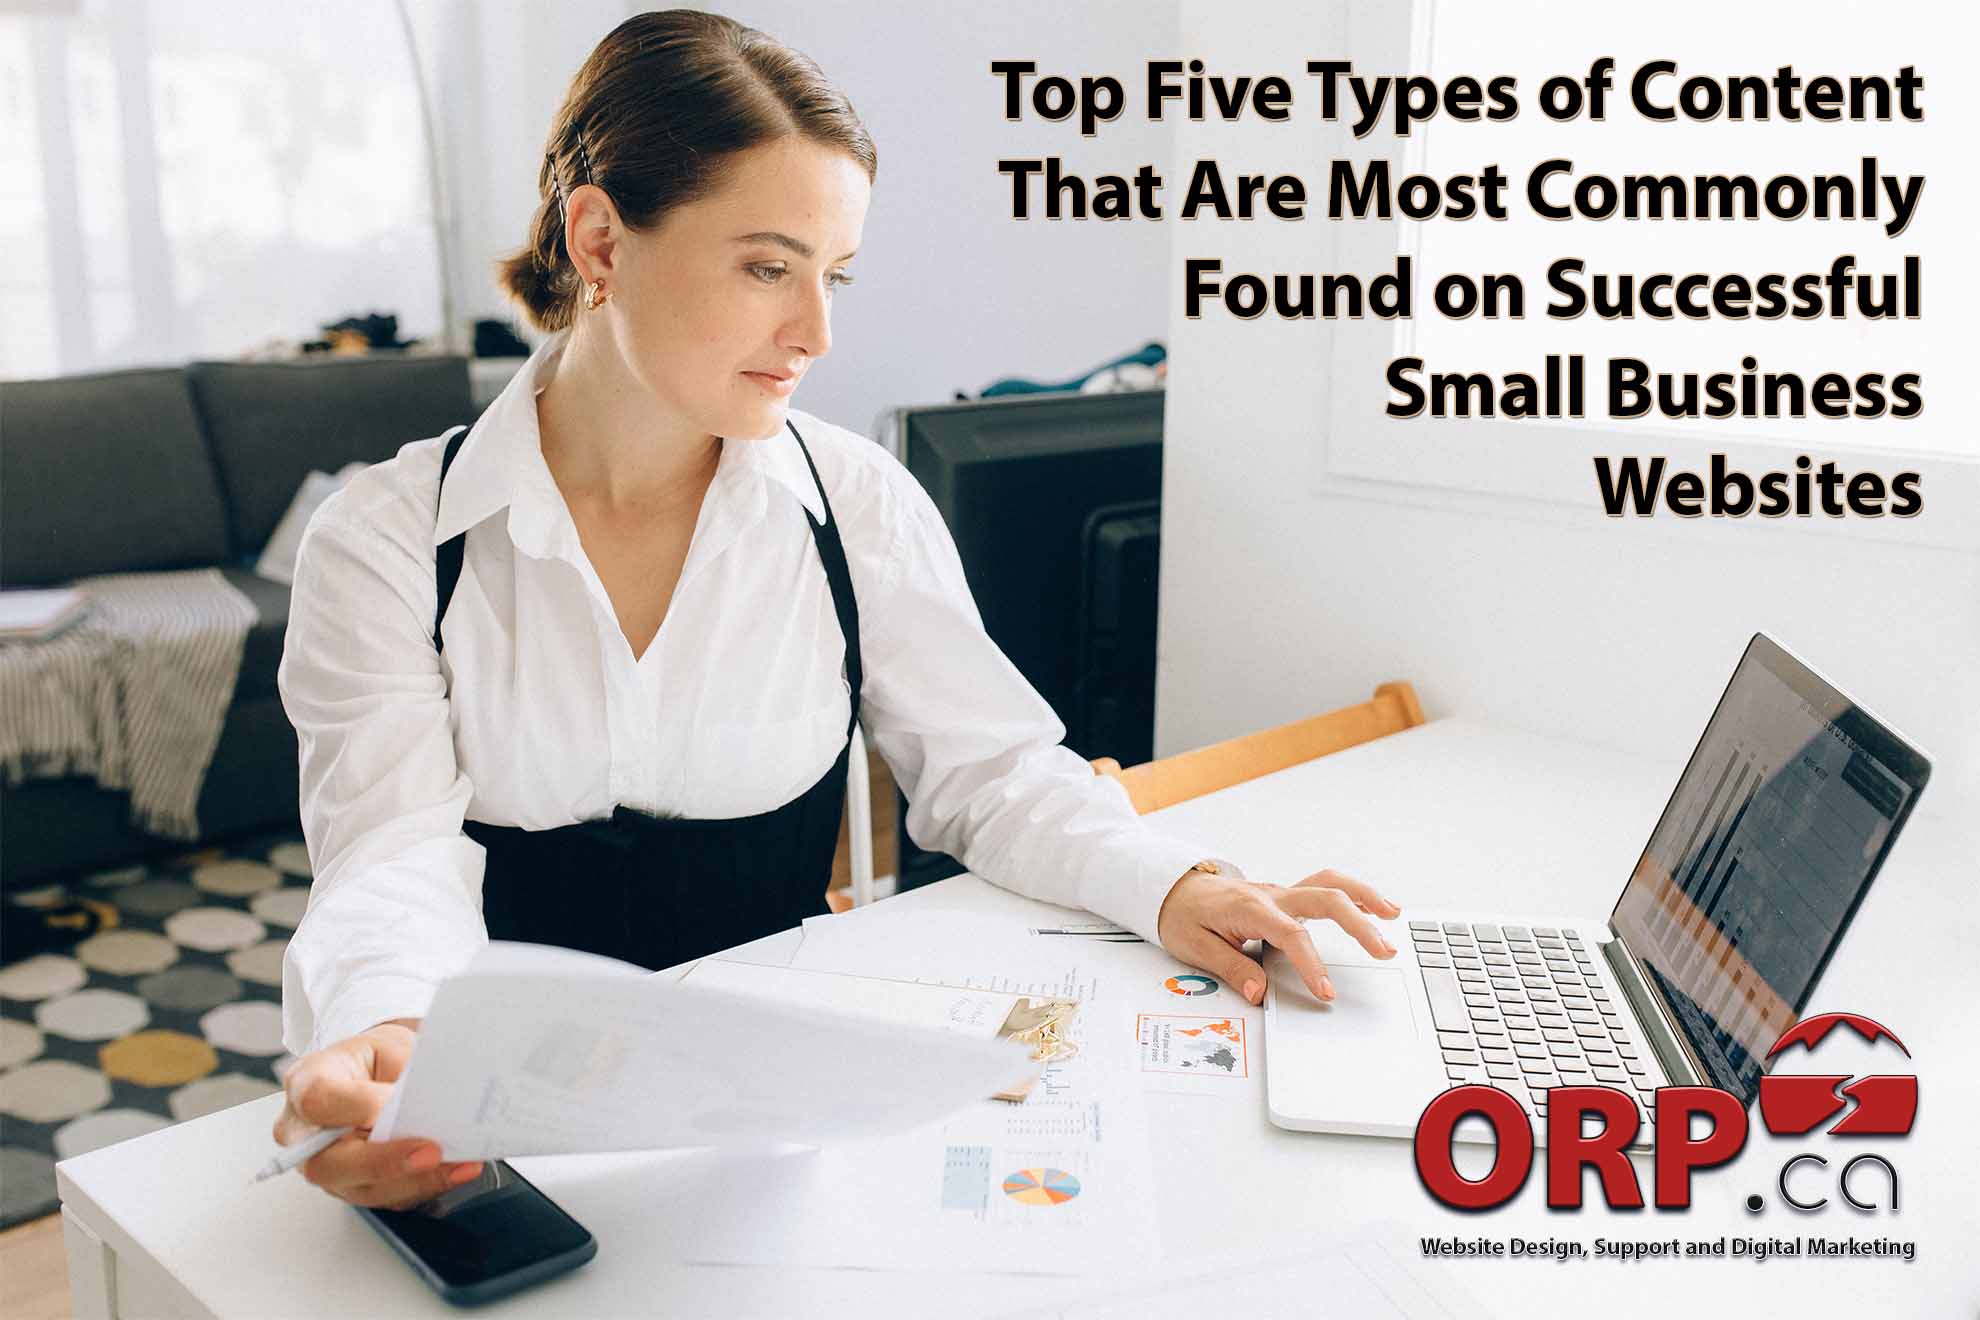 Top Five Types of Content That Are Most Commonly Found on Successful Small Business Websites weekly blog article from the small business experts at ORP.ca